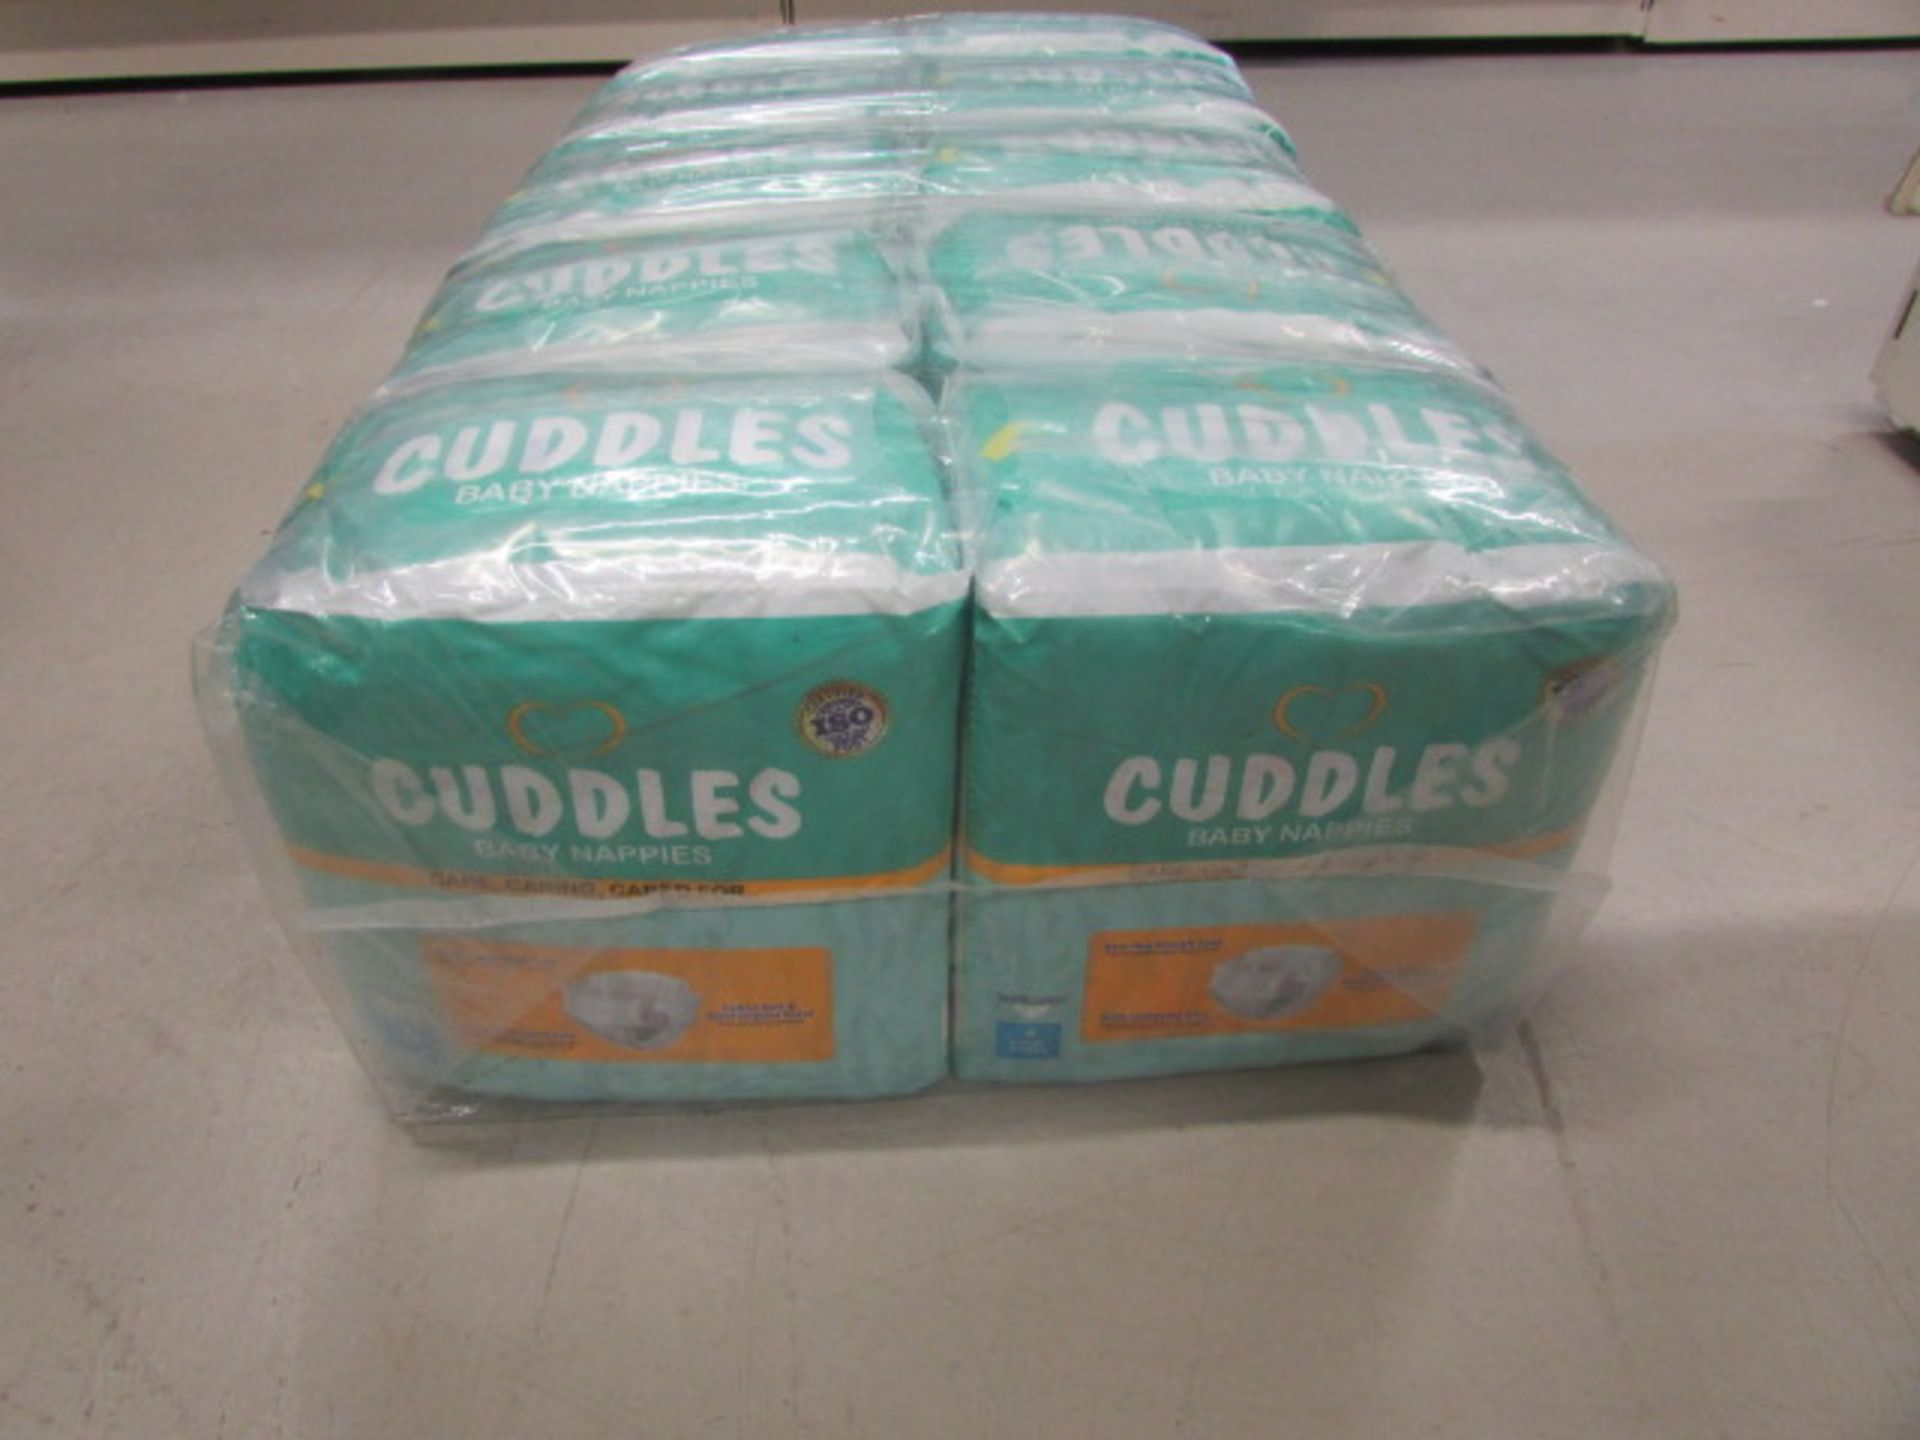 10 x Outer Carton, 10 Packs In An Outer, 18 Nappies in A Pack (1,800 Nappies In Total) [Size 3]